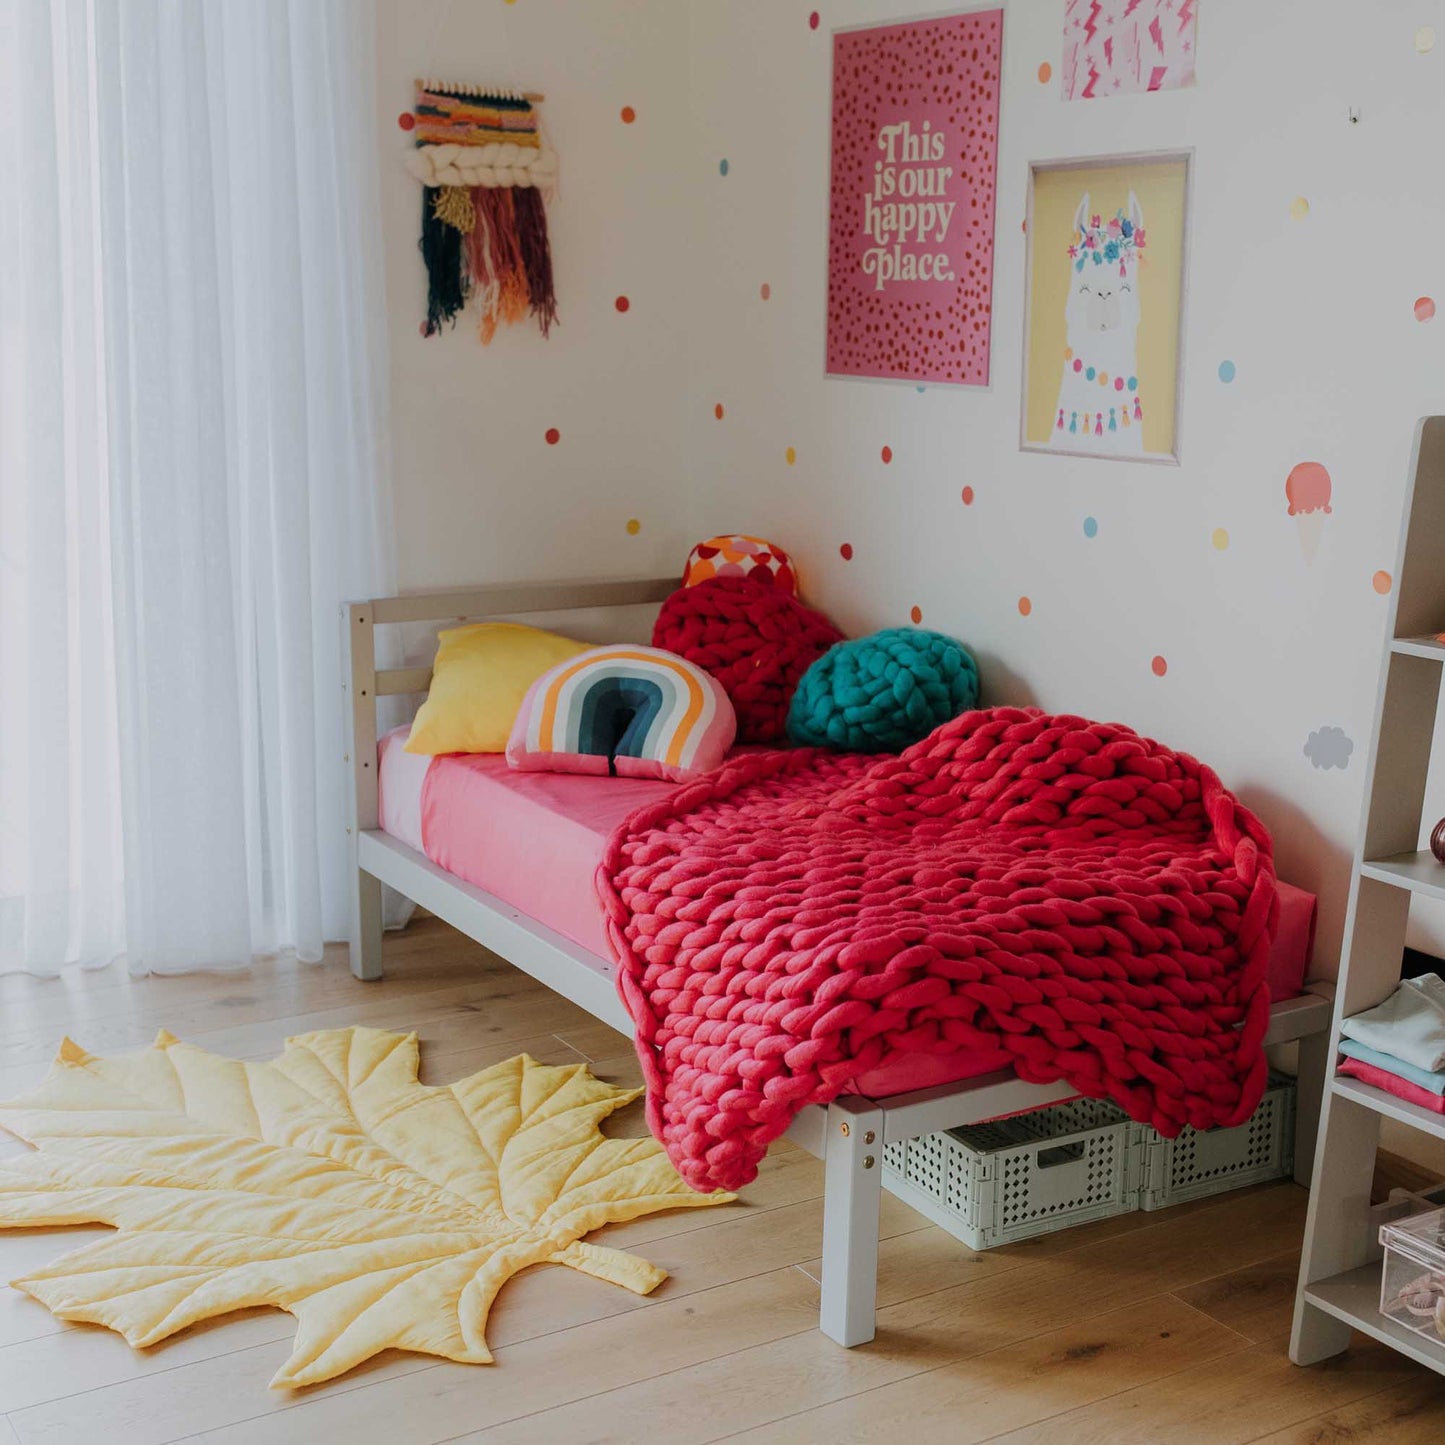 A Sweet Home From Wood kids' bed on legs with a horizontal rail headboard and rug create a vibrant atmosphere in this girl's room.